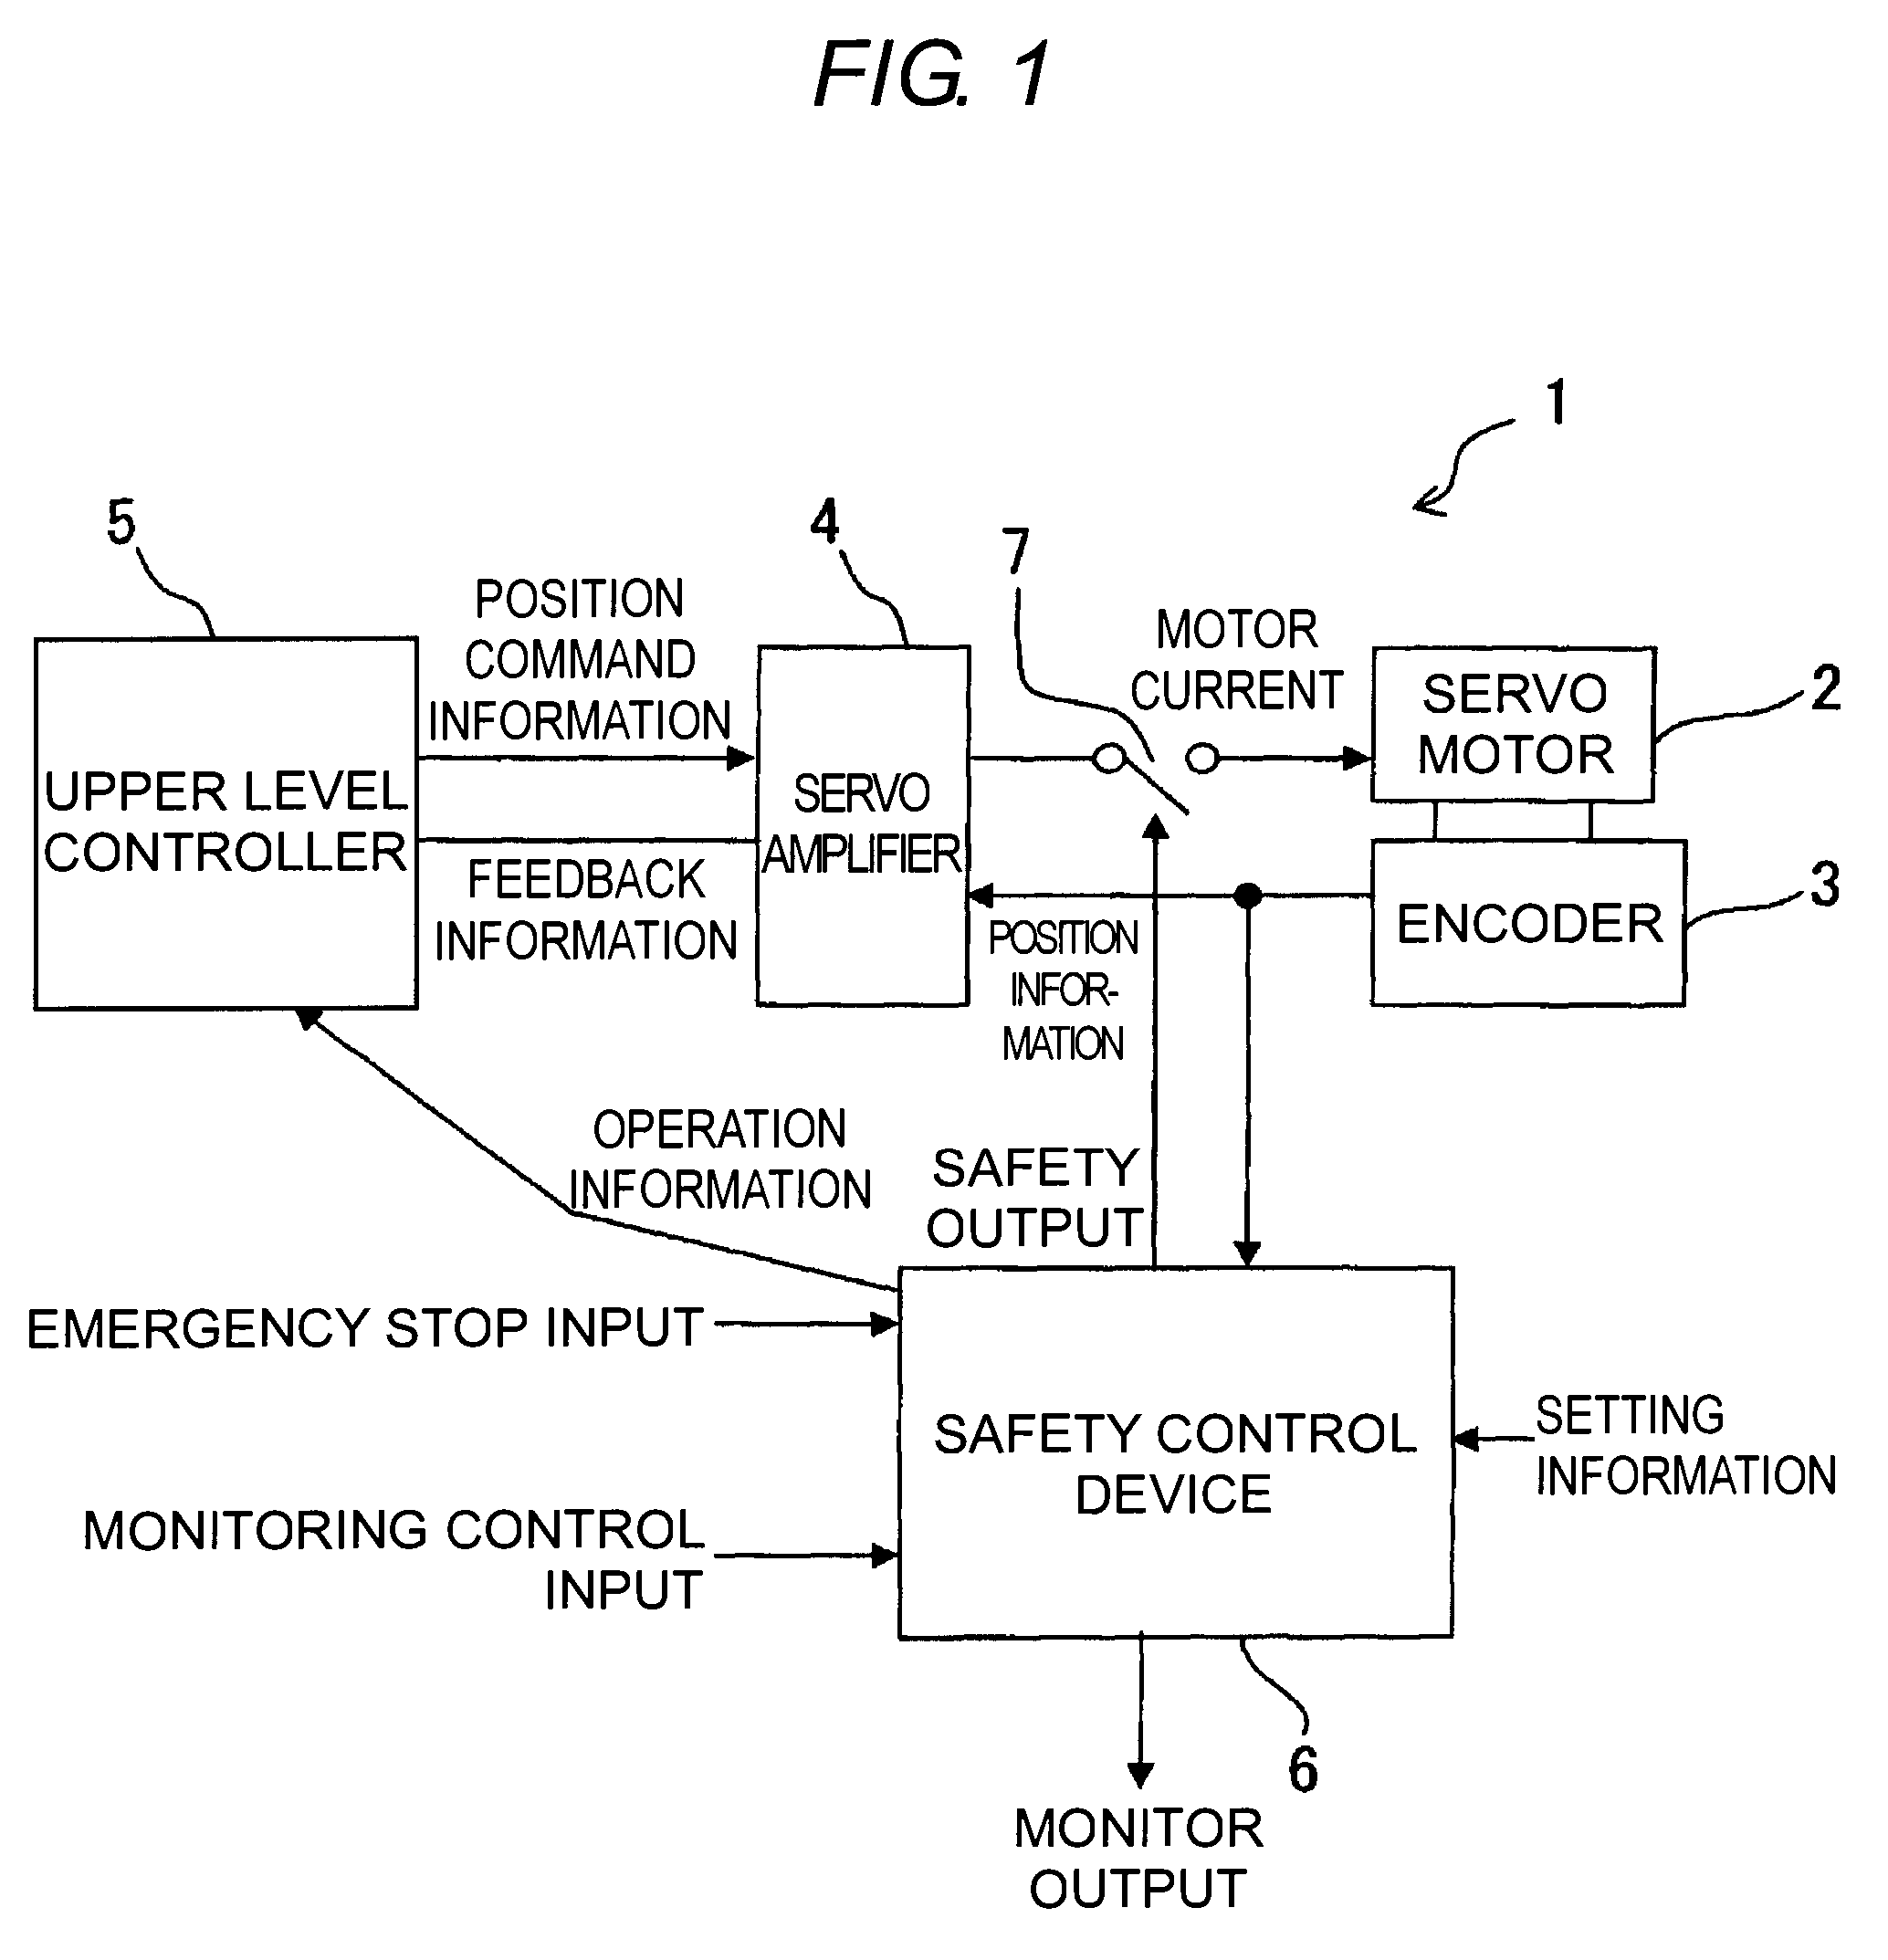 Servo system and safety control device